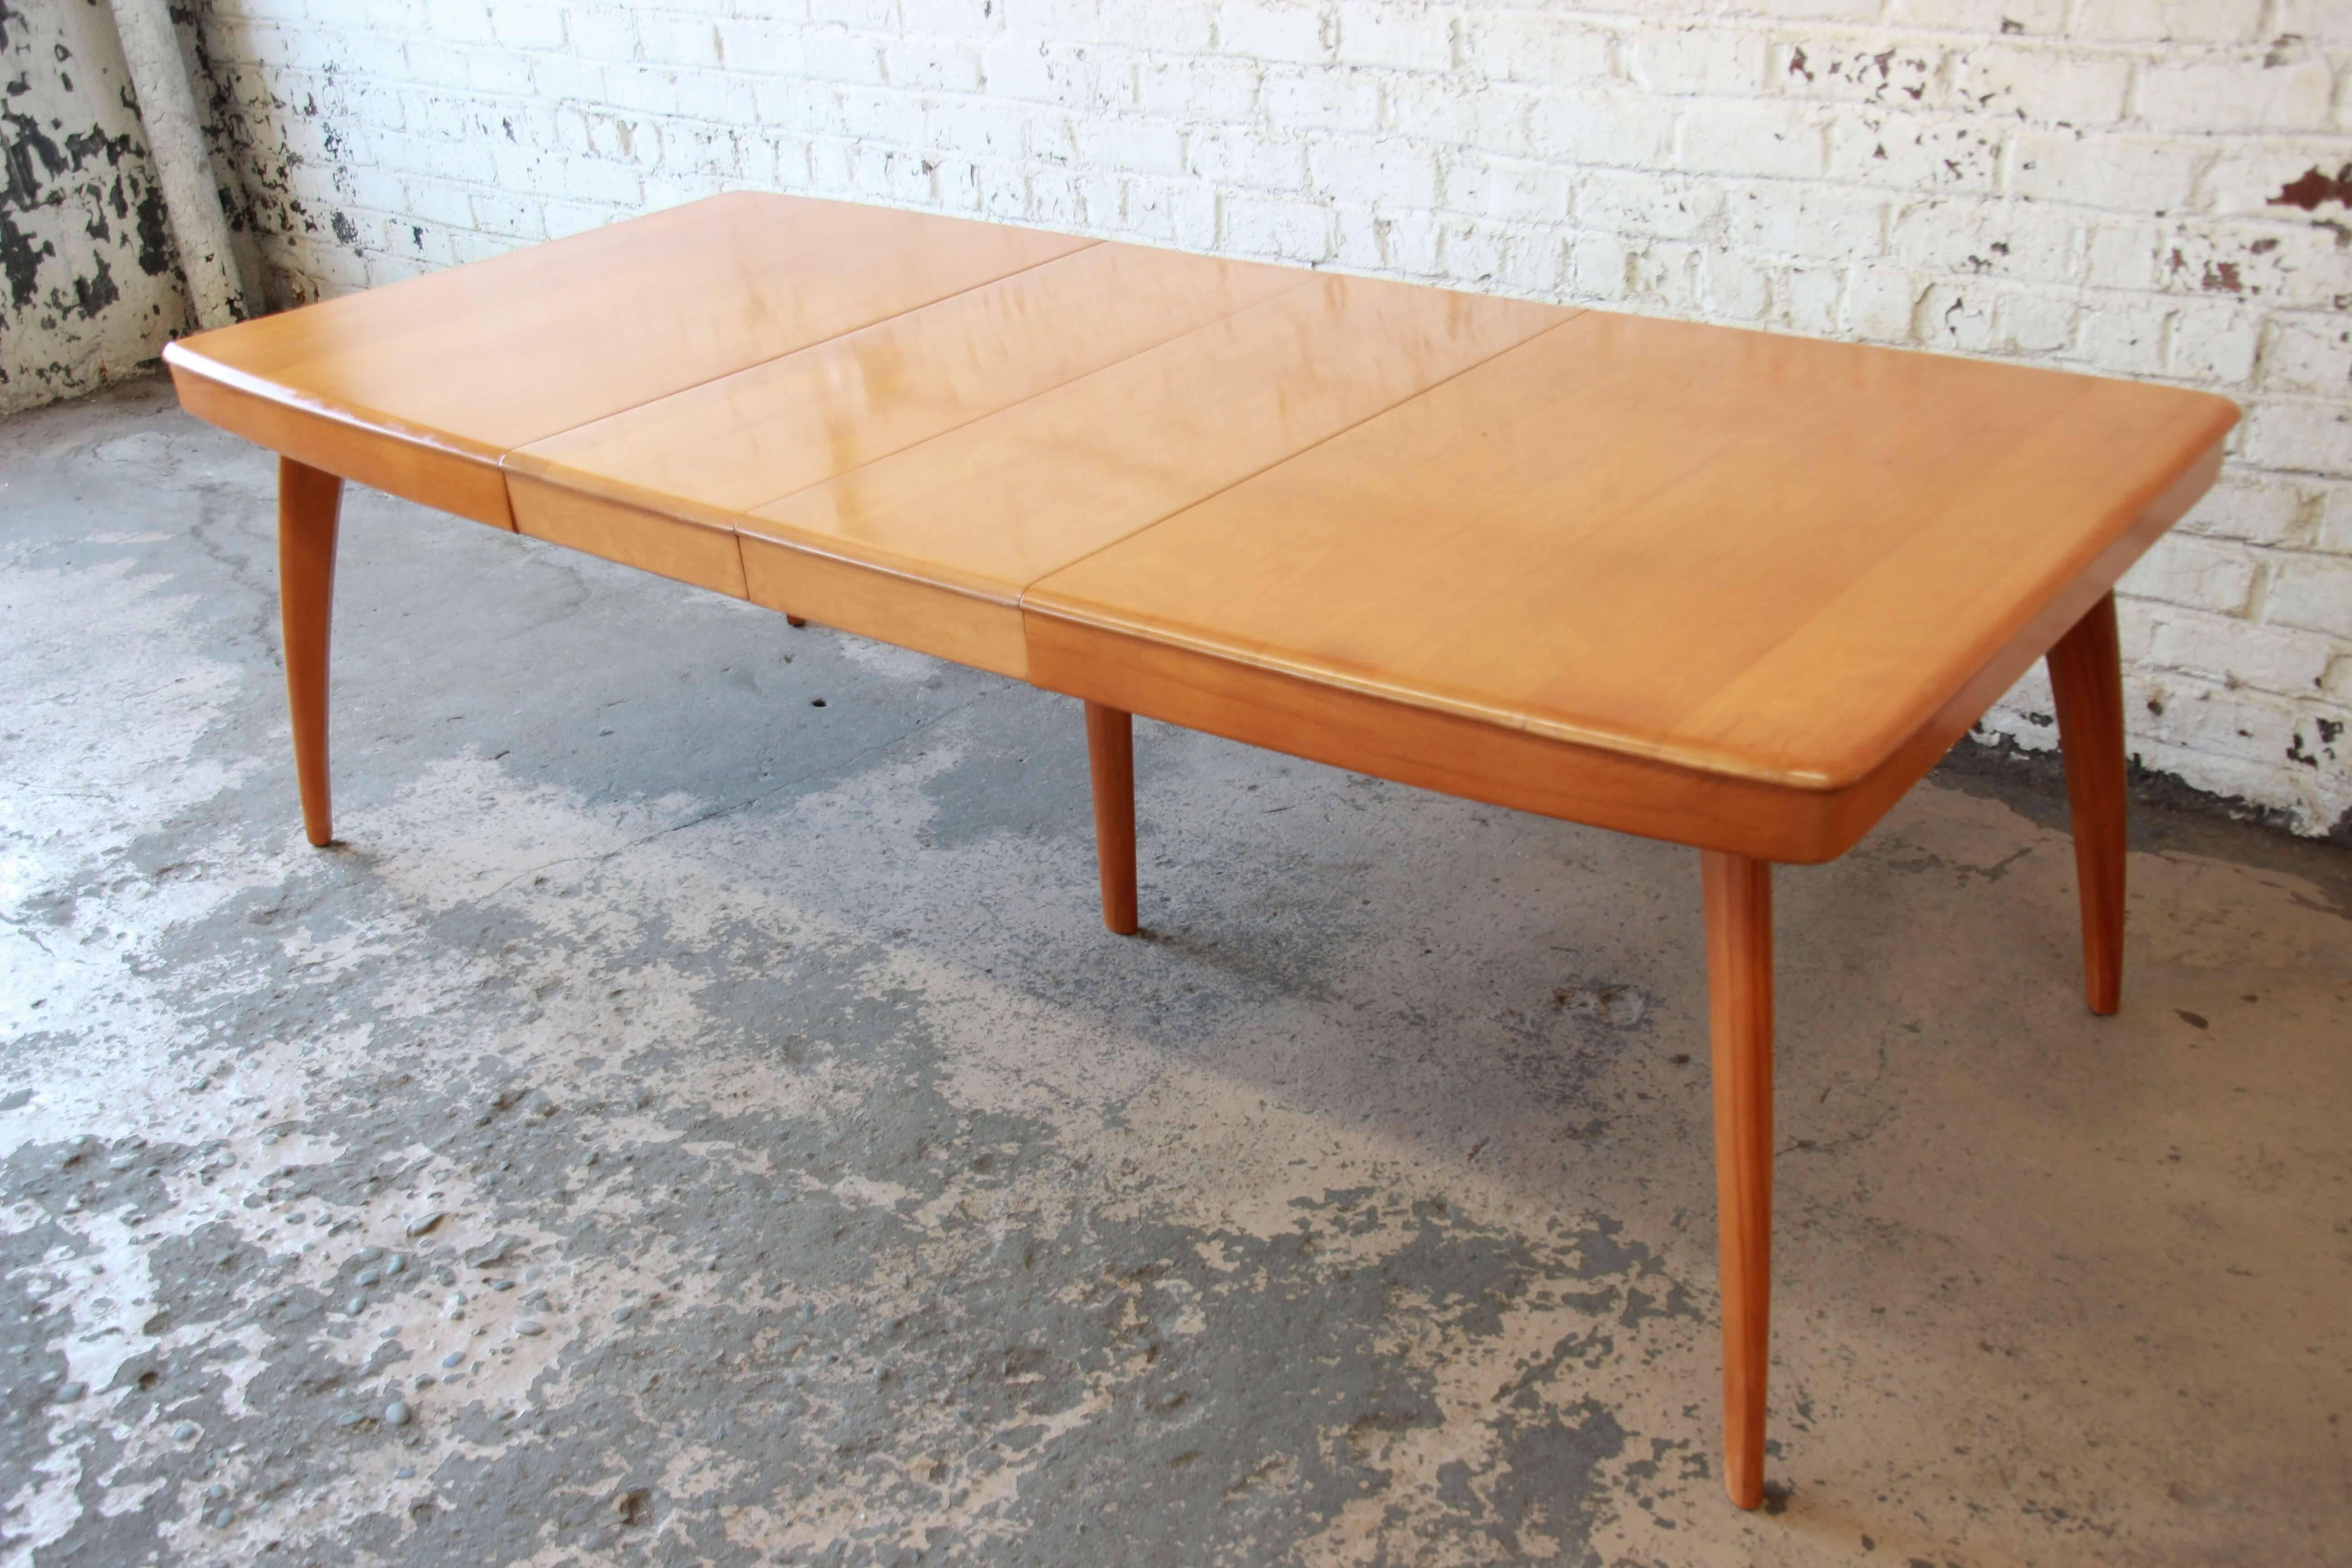 Offering a very nice vintage Heywood-Wakefield extension dining table. The table is made from solid birch and extends to 90